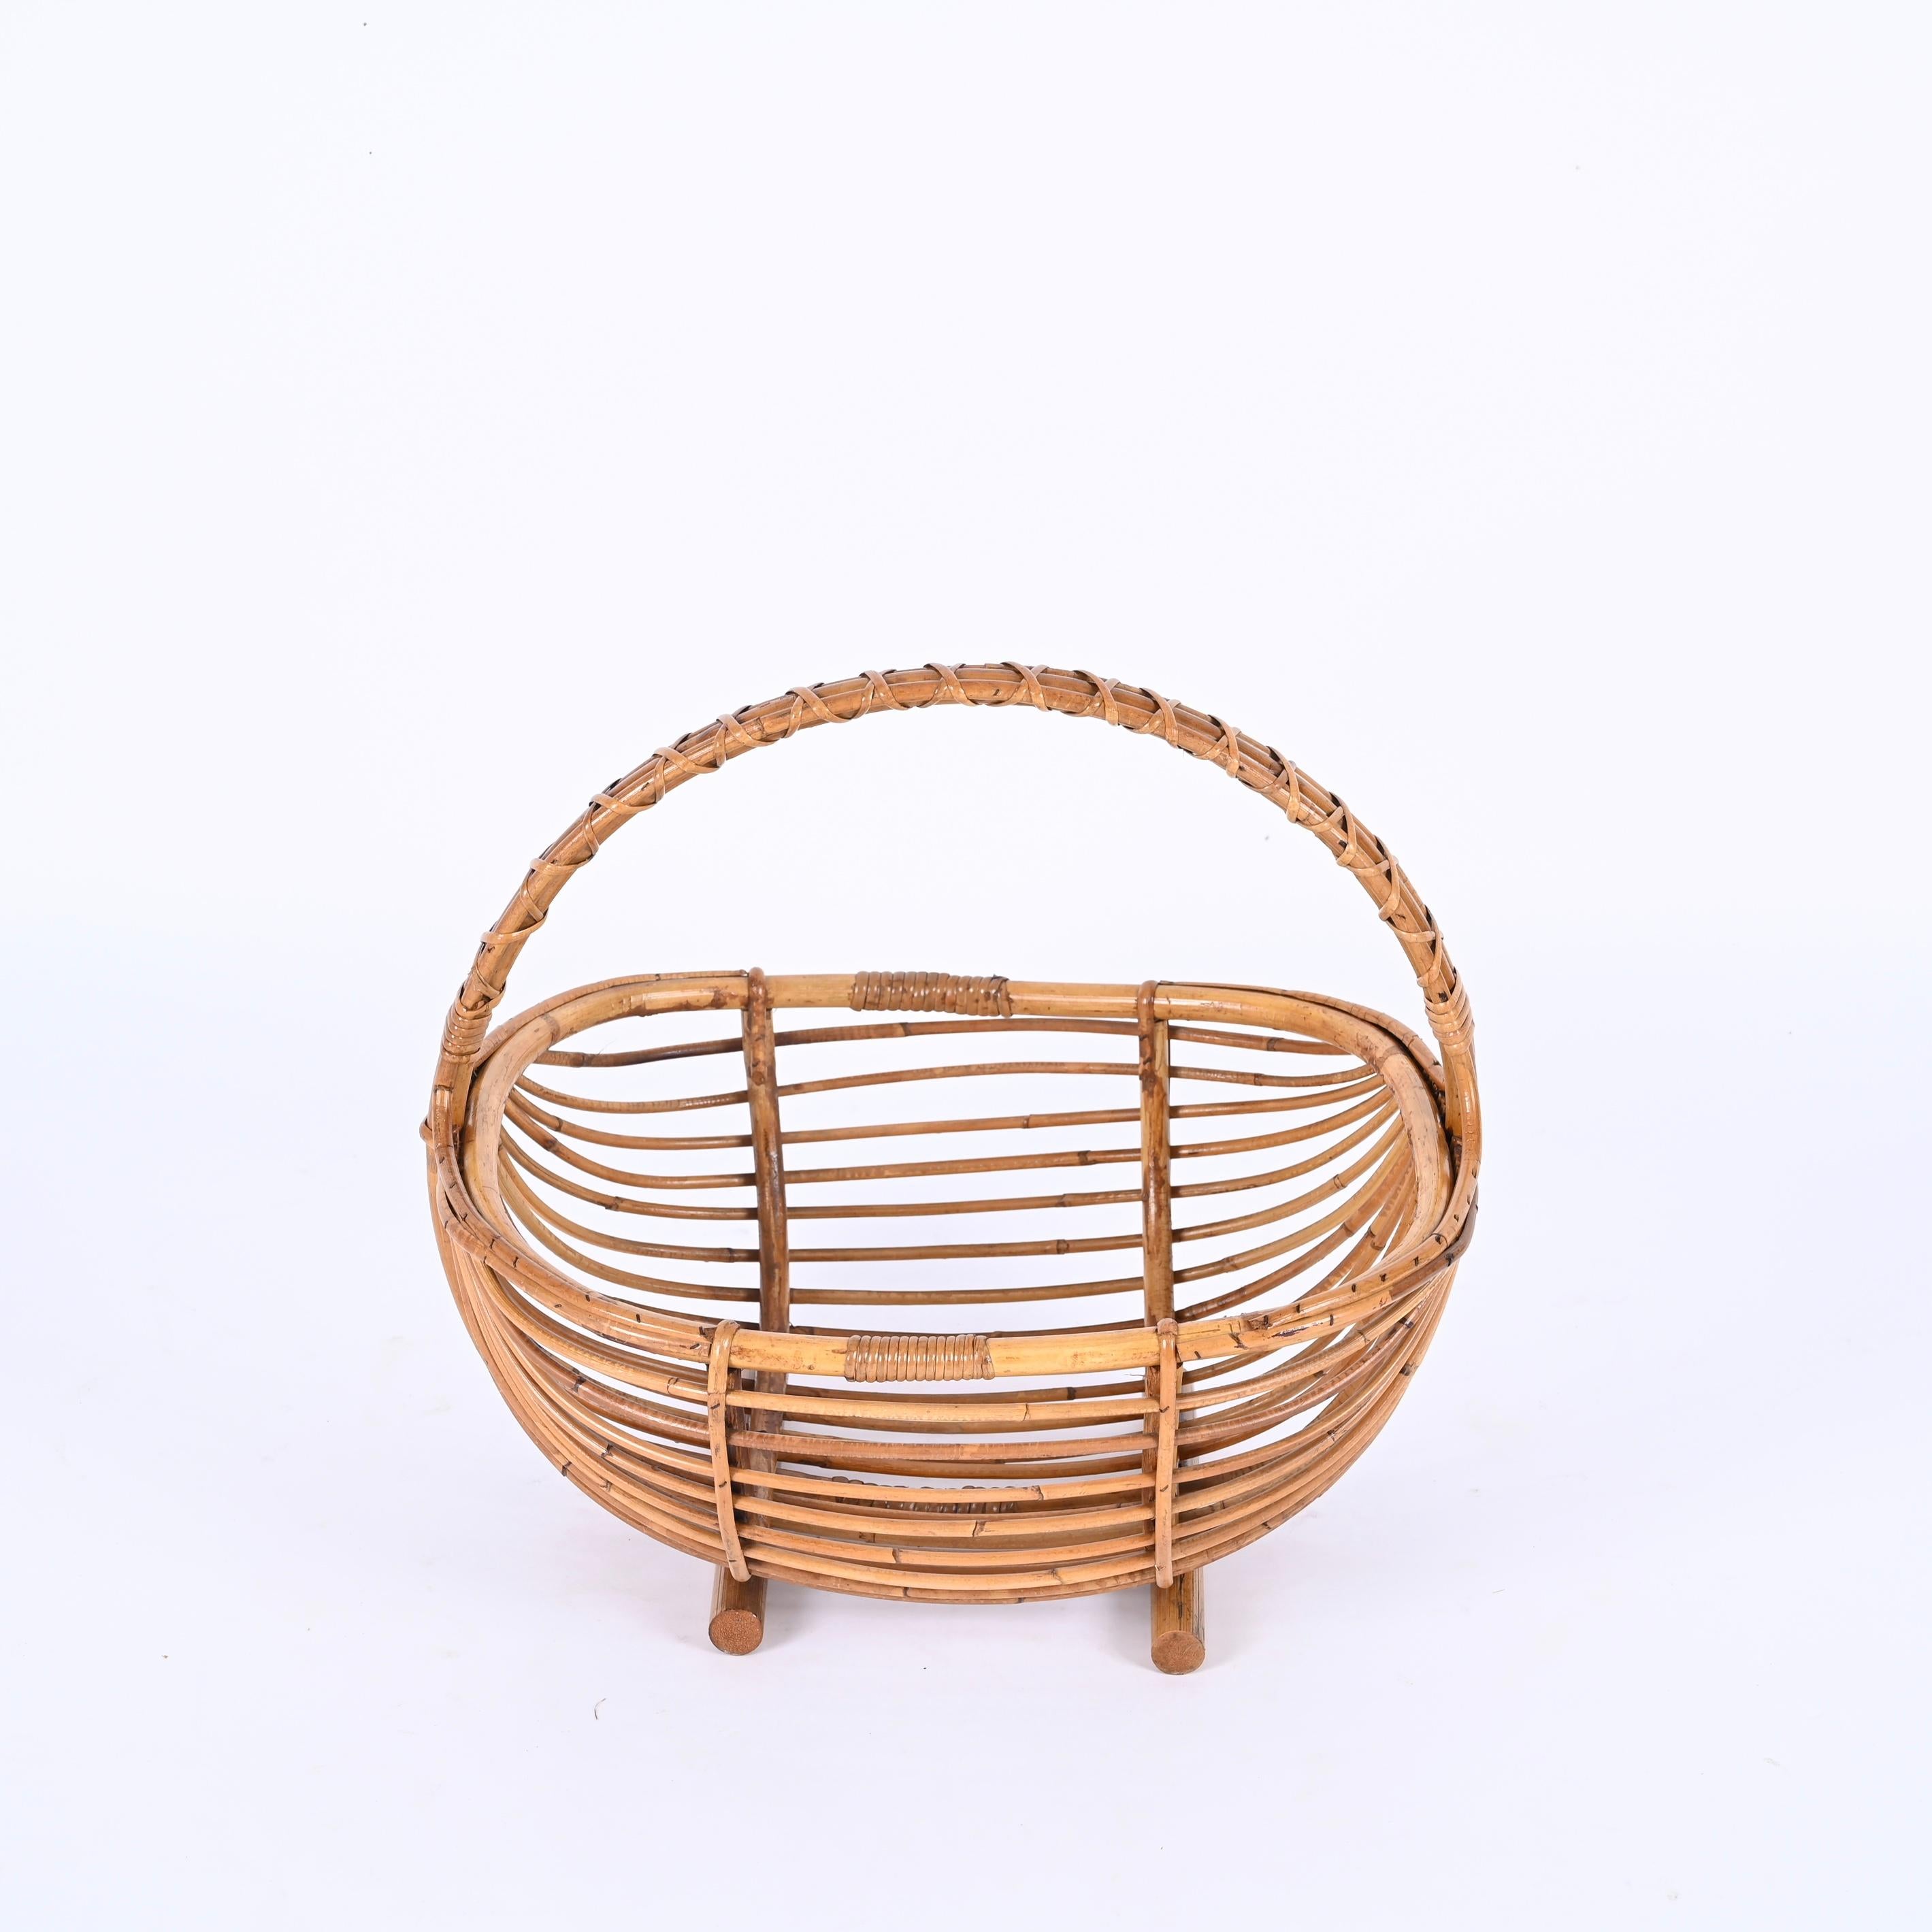 Midcentury French Riviera Magazine Rack in Bamboo and Rattan, Italy 1970s For Sale 5